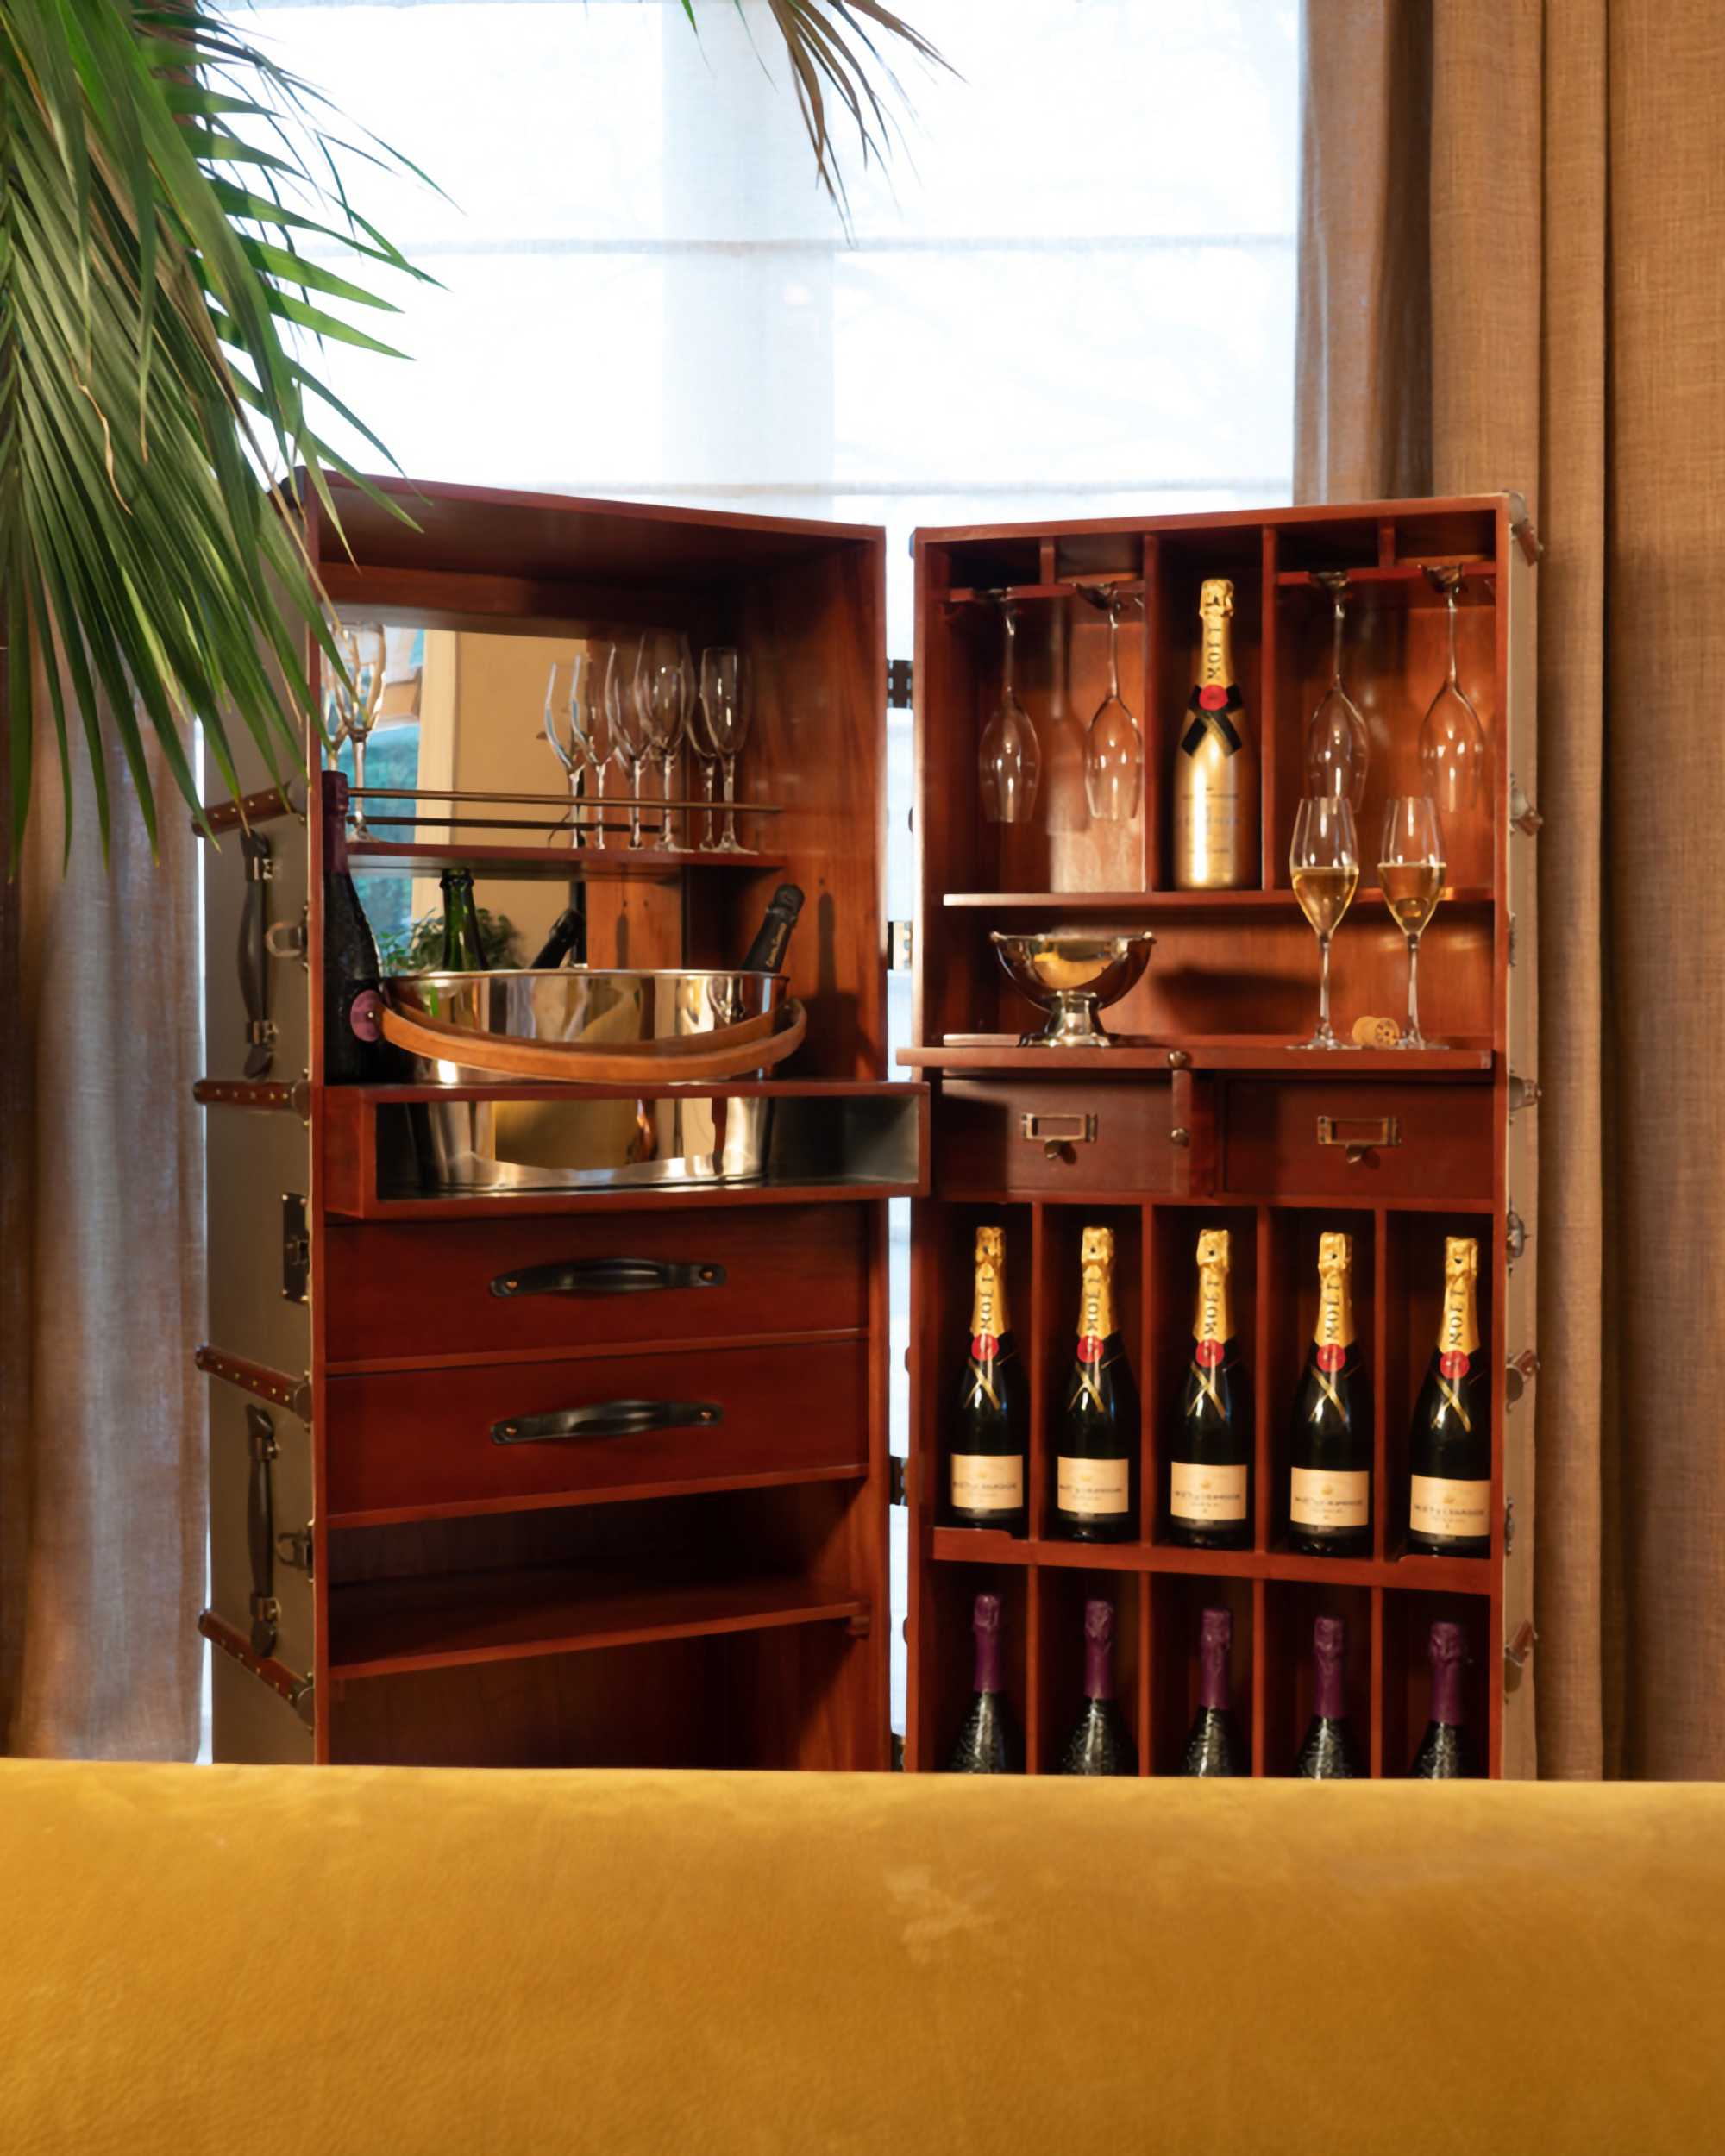 Authentic Models Stateroom Bar